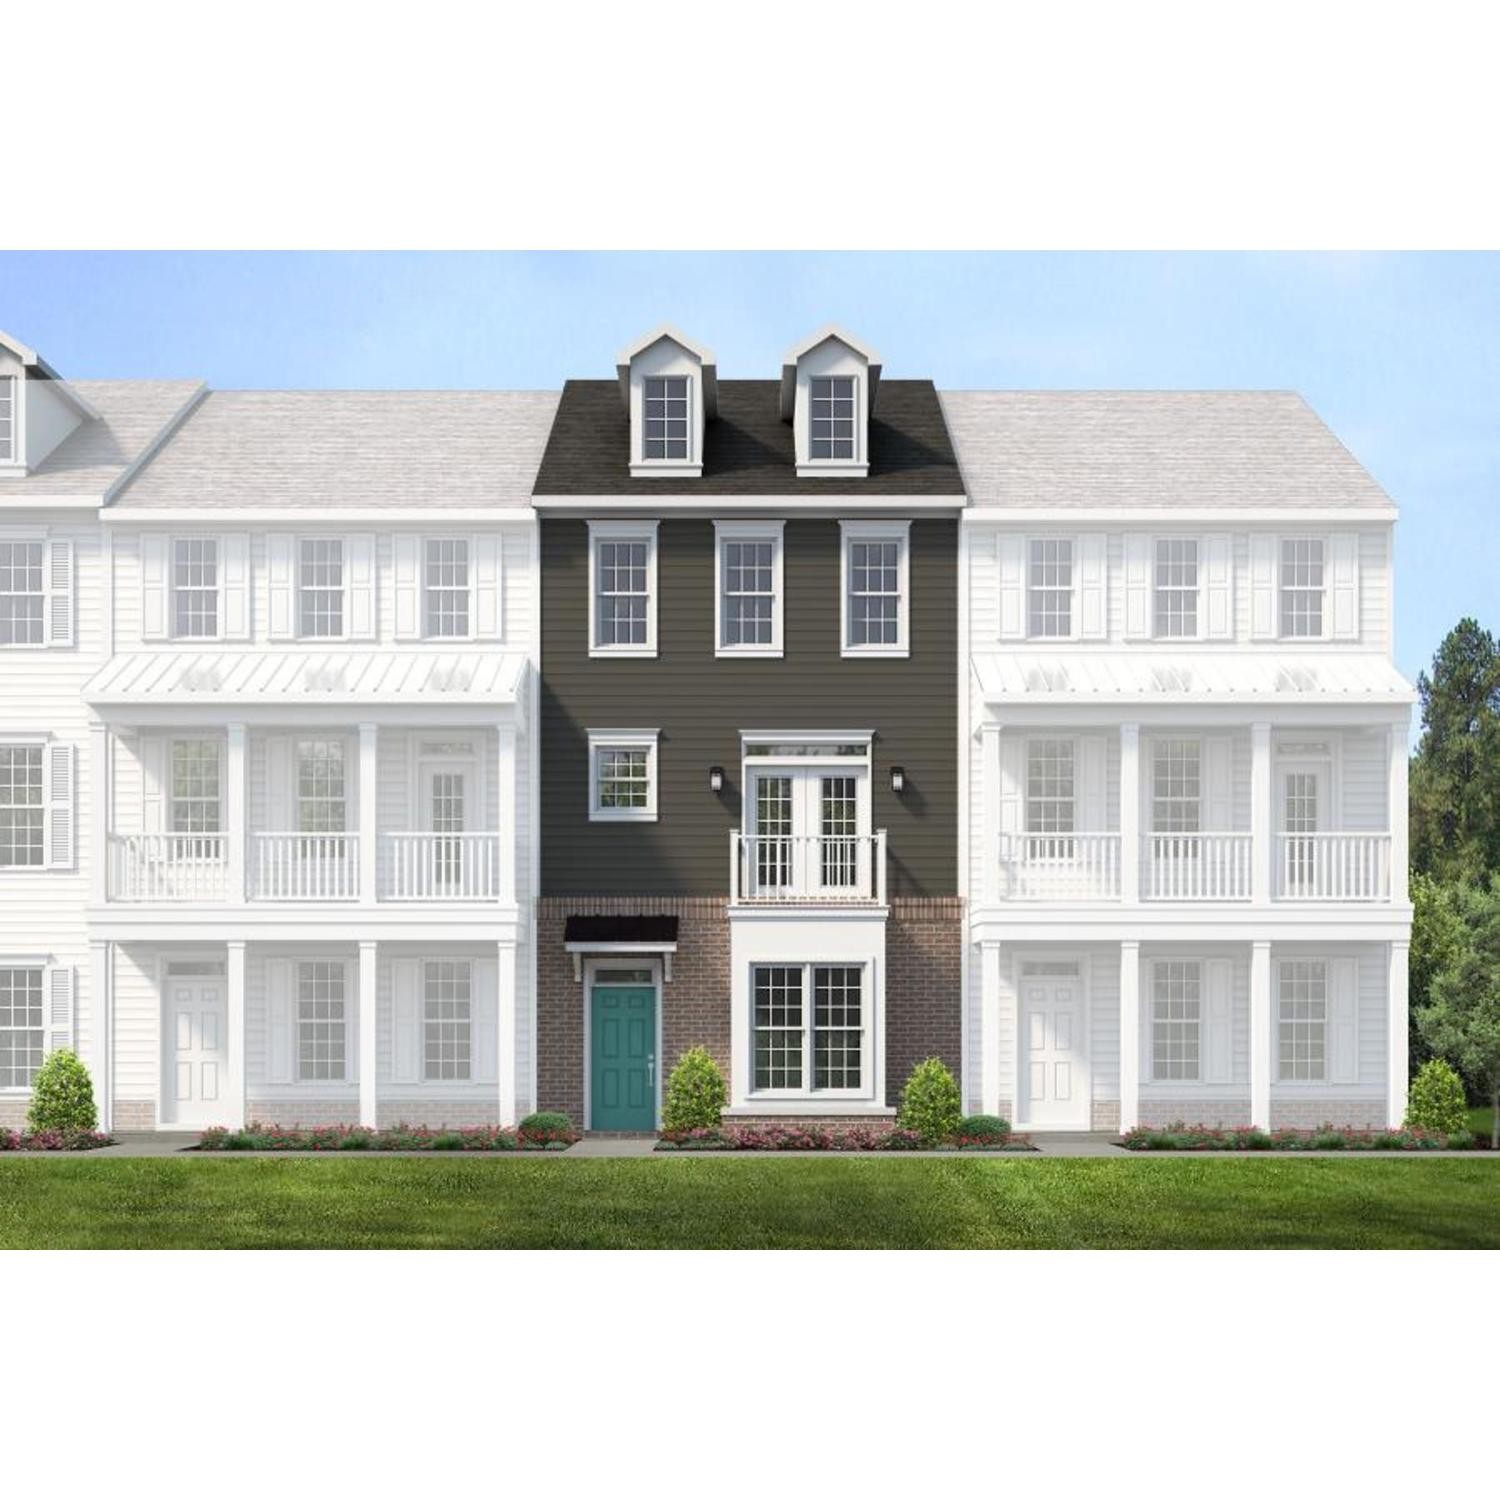 23. Cosby Village 3-Story Townhomes